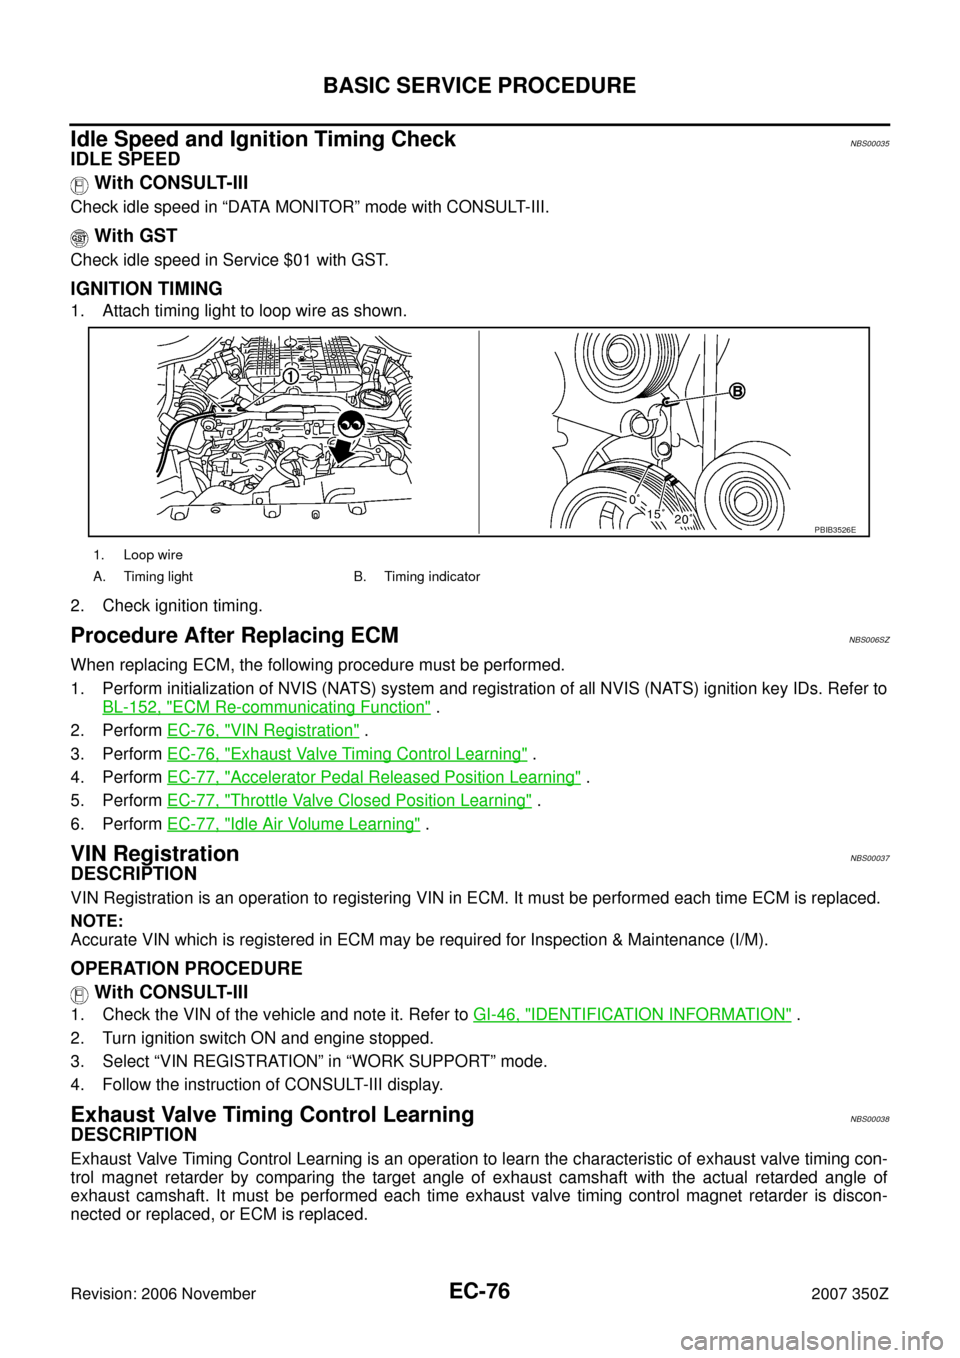 NISSAN 350Z 2007 Z33 Engine Control Workshop Manual EC-76
BASIC SERVICE PROCEDURE
Revision: 2006 November2007 350Z
Idle Speed and Ignition Timing CheckNBS00035
IDLE SPEED
 With CONSULT-III
Check idle speed in “DATA MONITOR” mode with CONSULT-III.
 